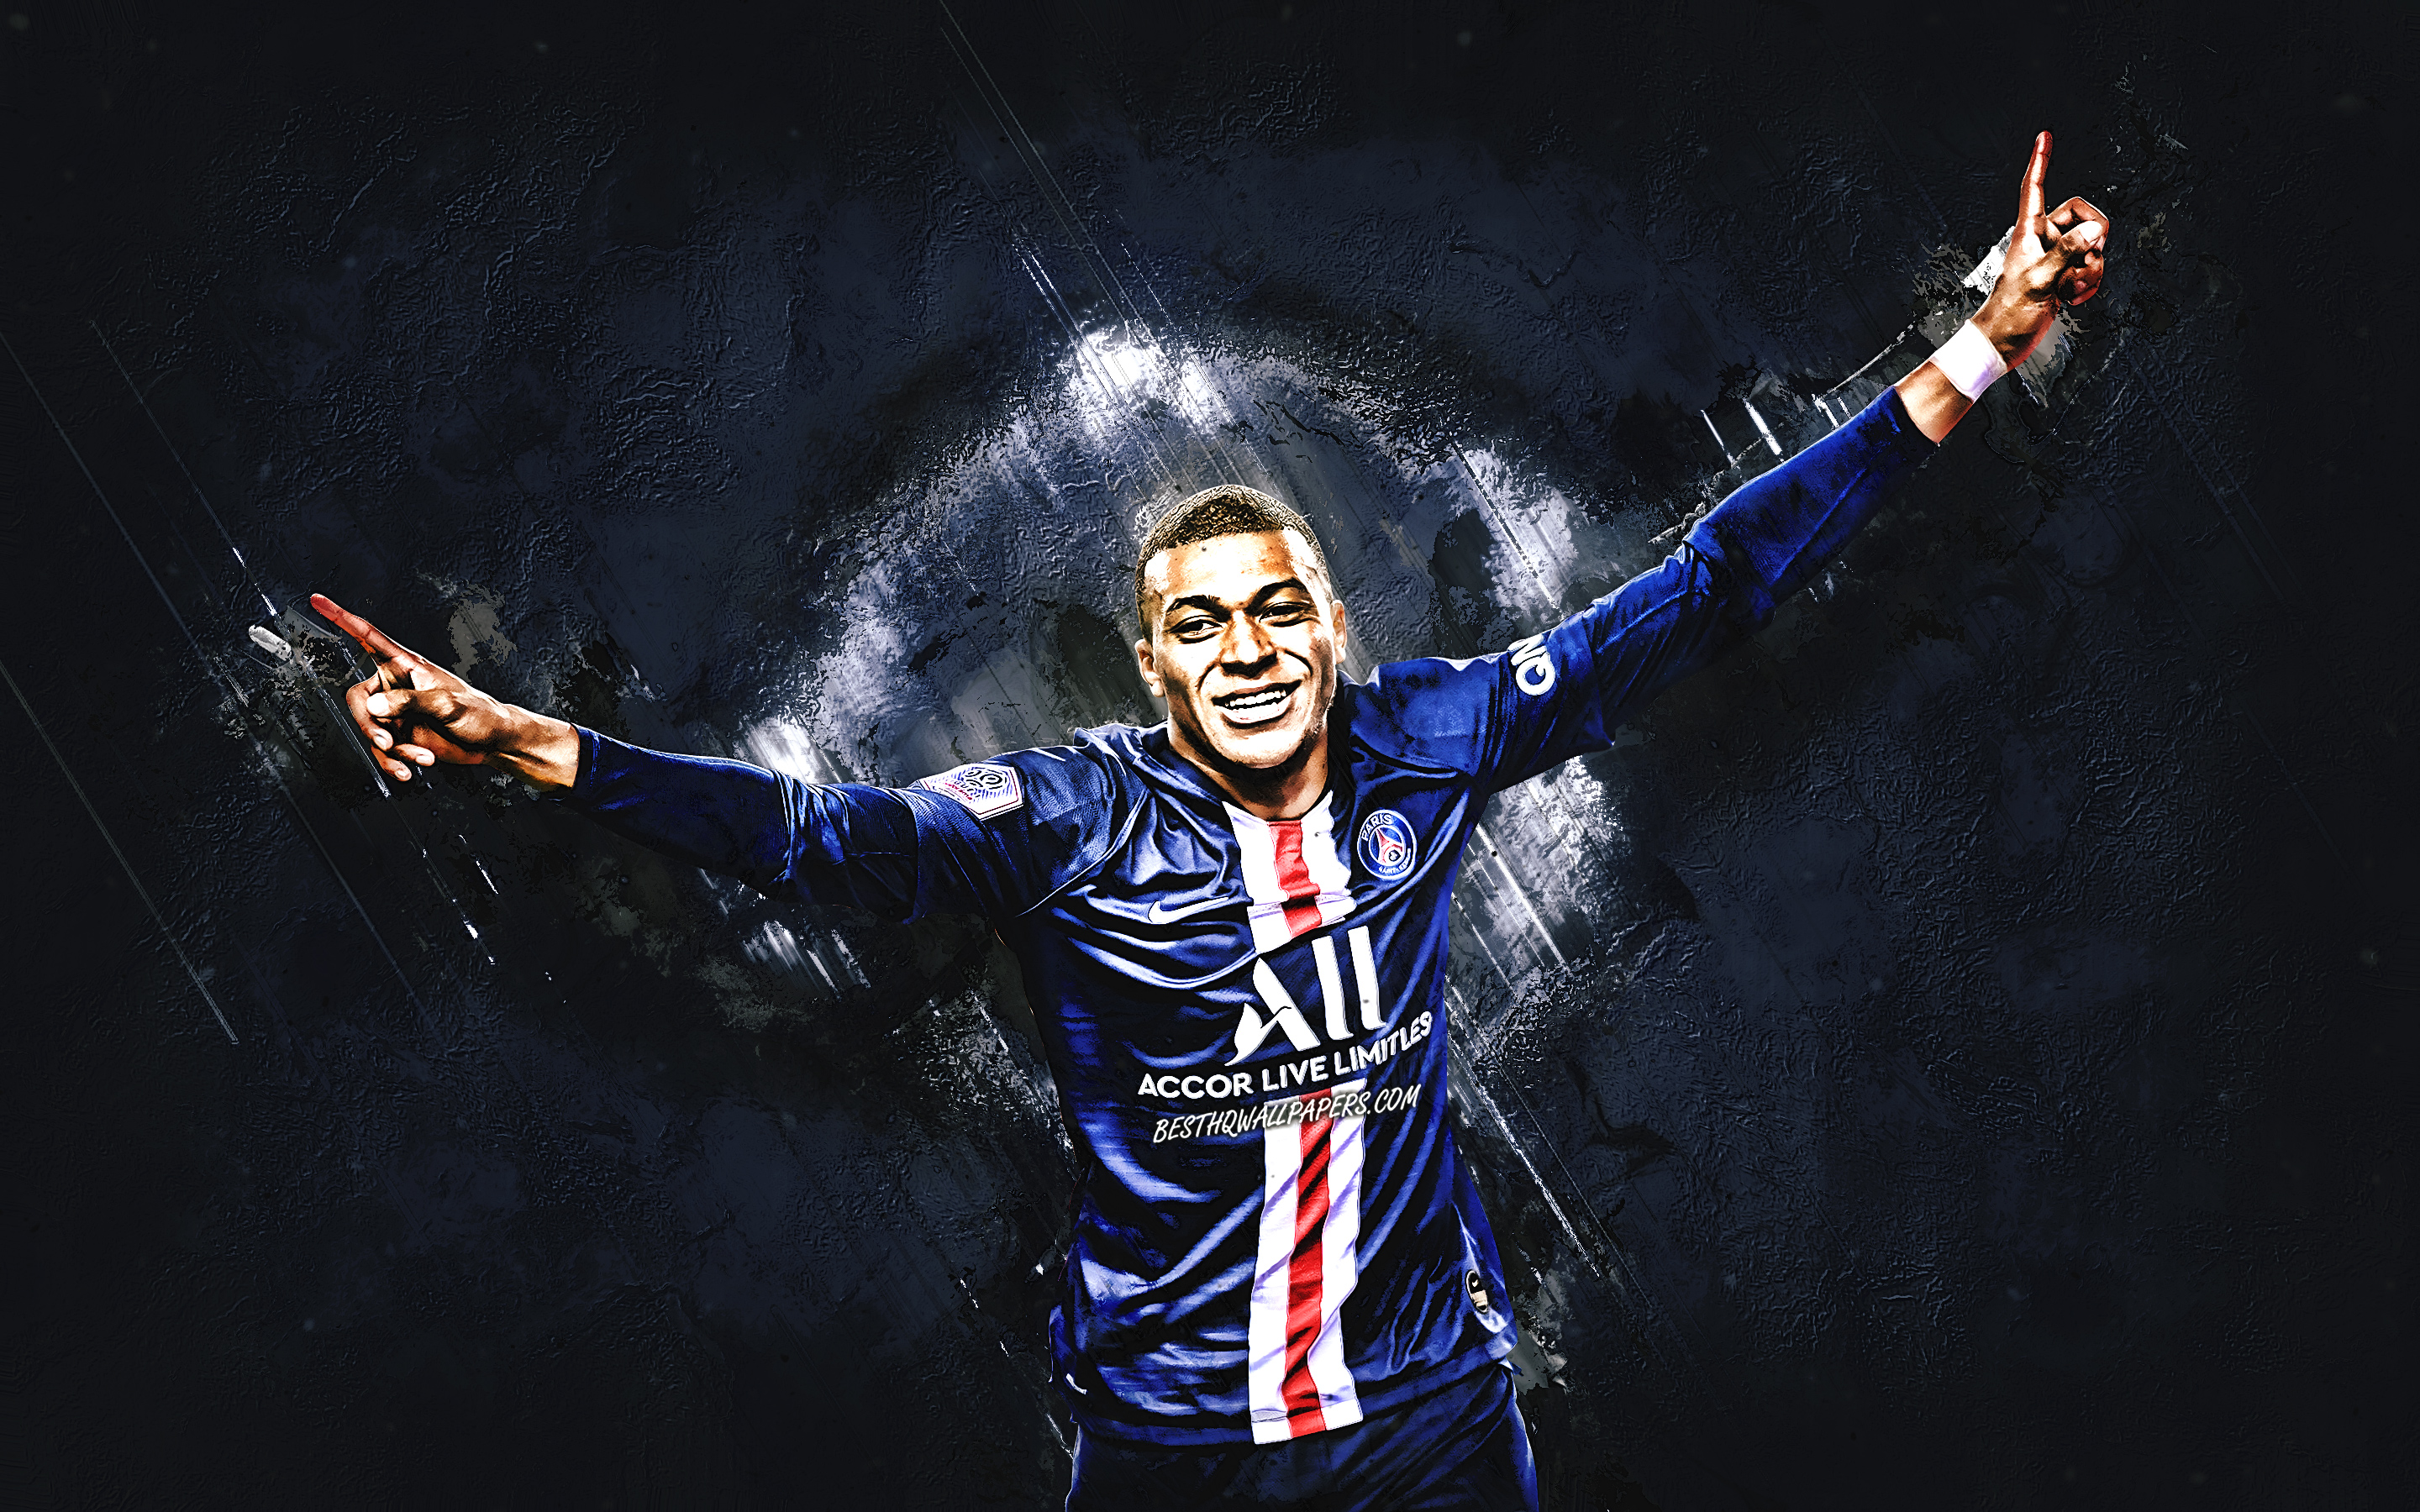 Download Wallpapers Kylian Mbappe Psg Football Star French Soccer Player Portrait Paris